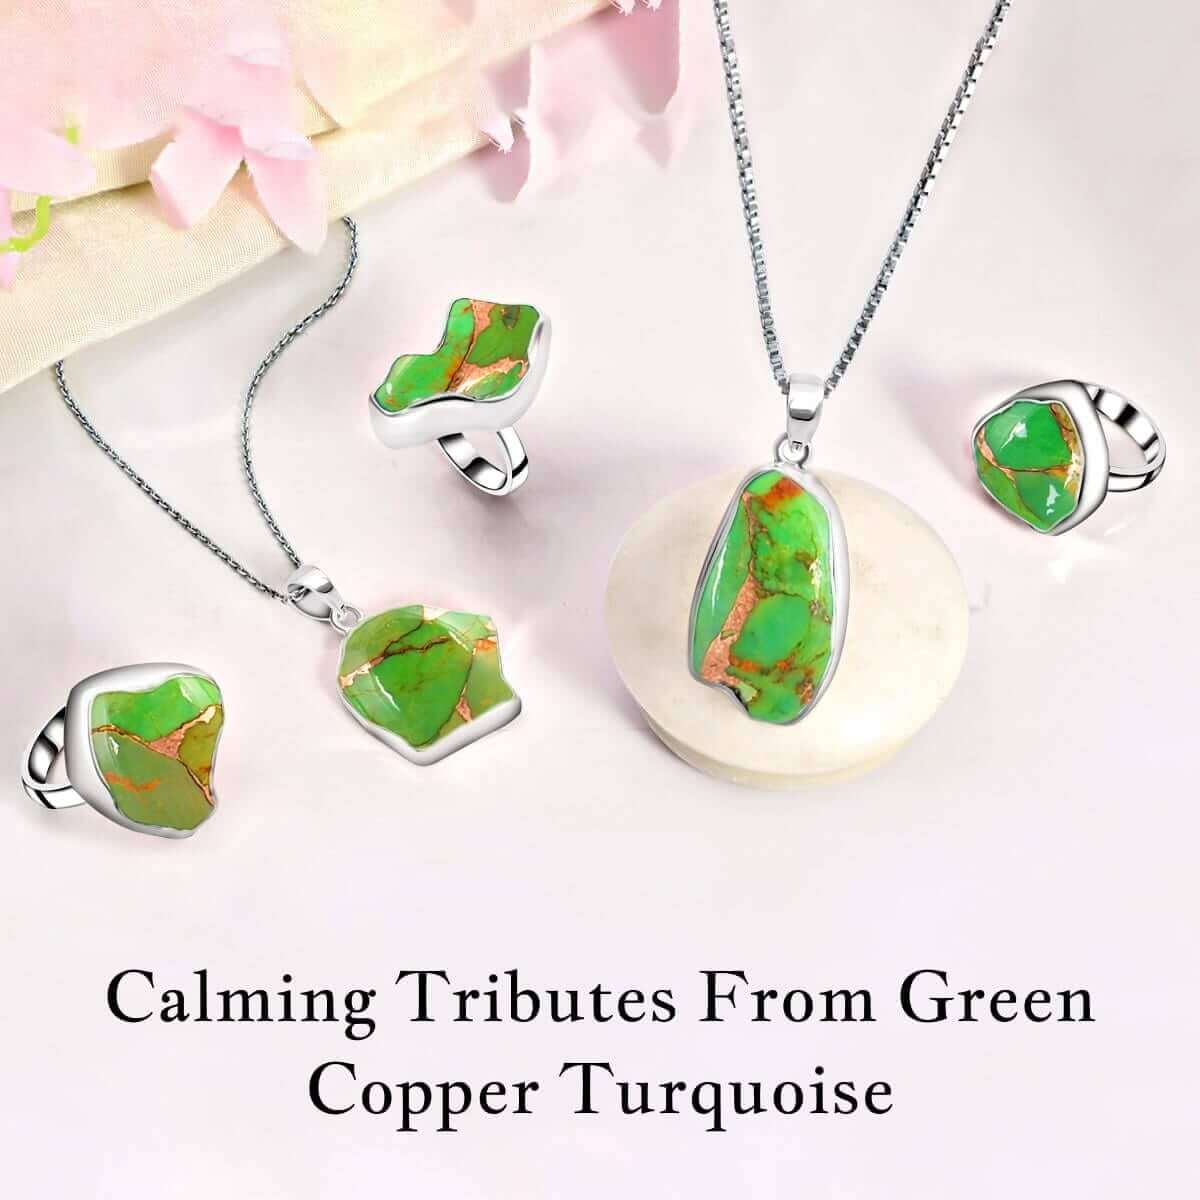 Attributes of Green Copper Turquoise